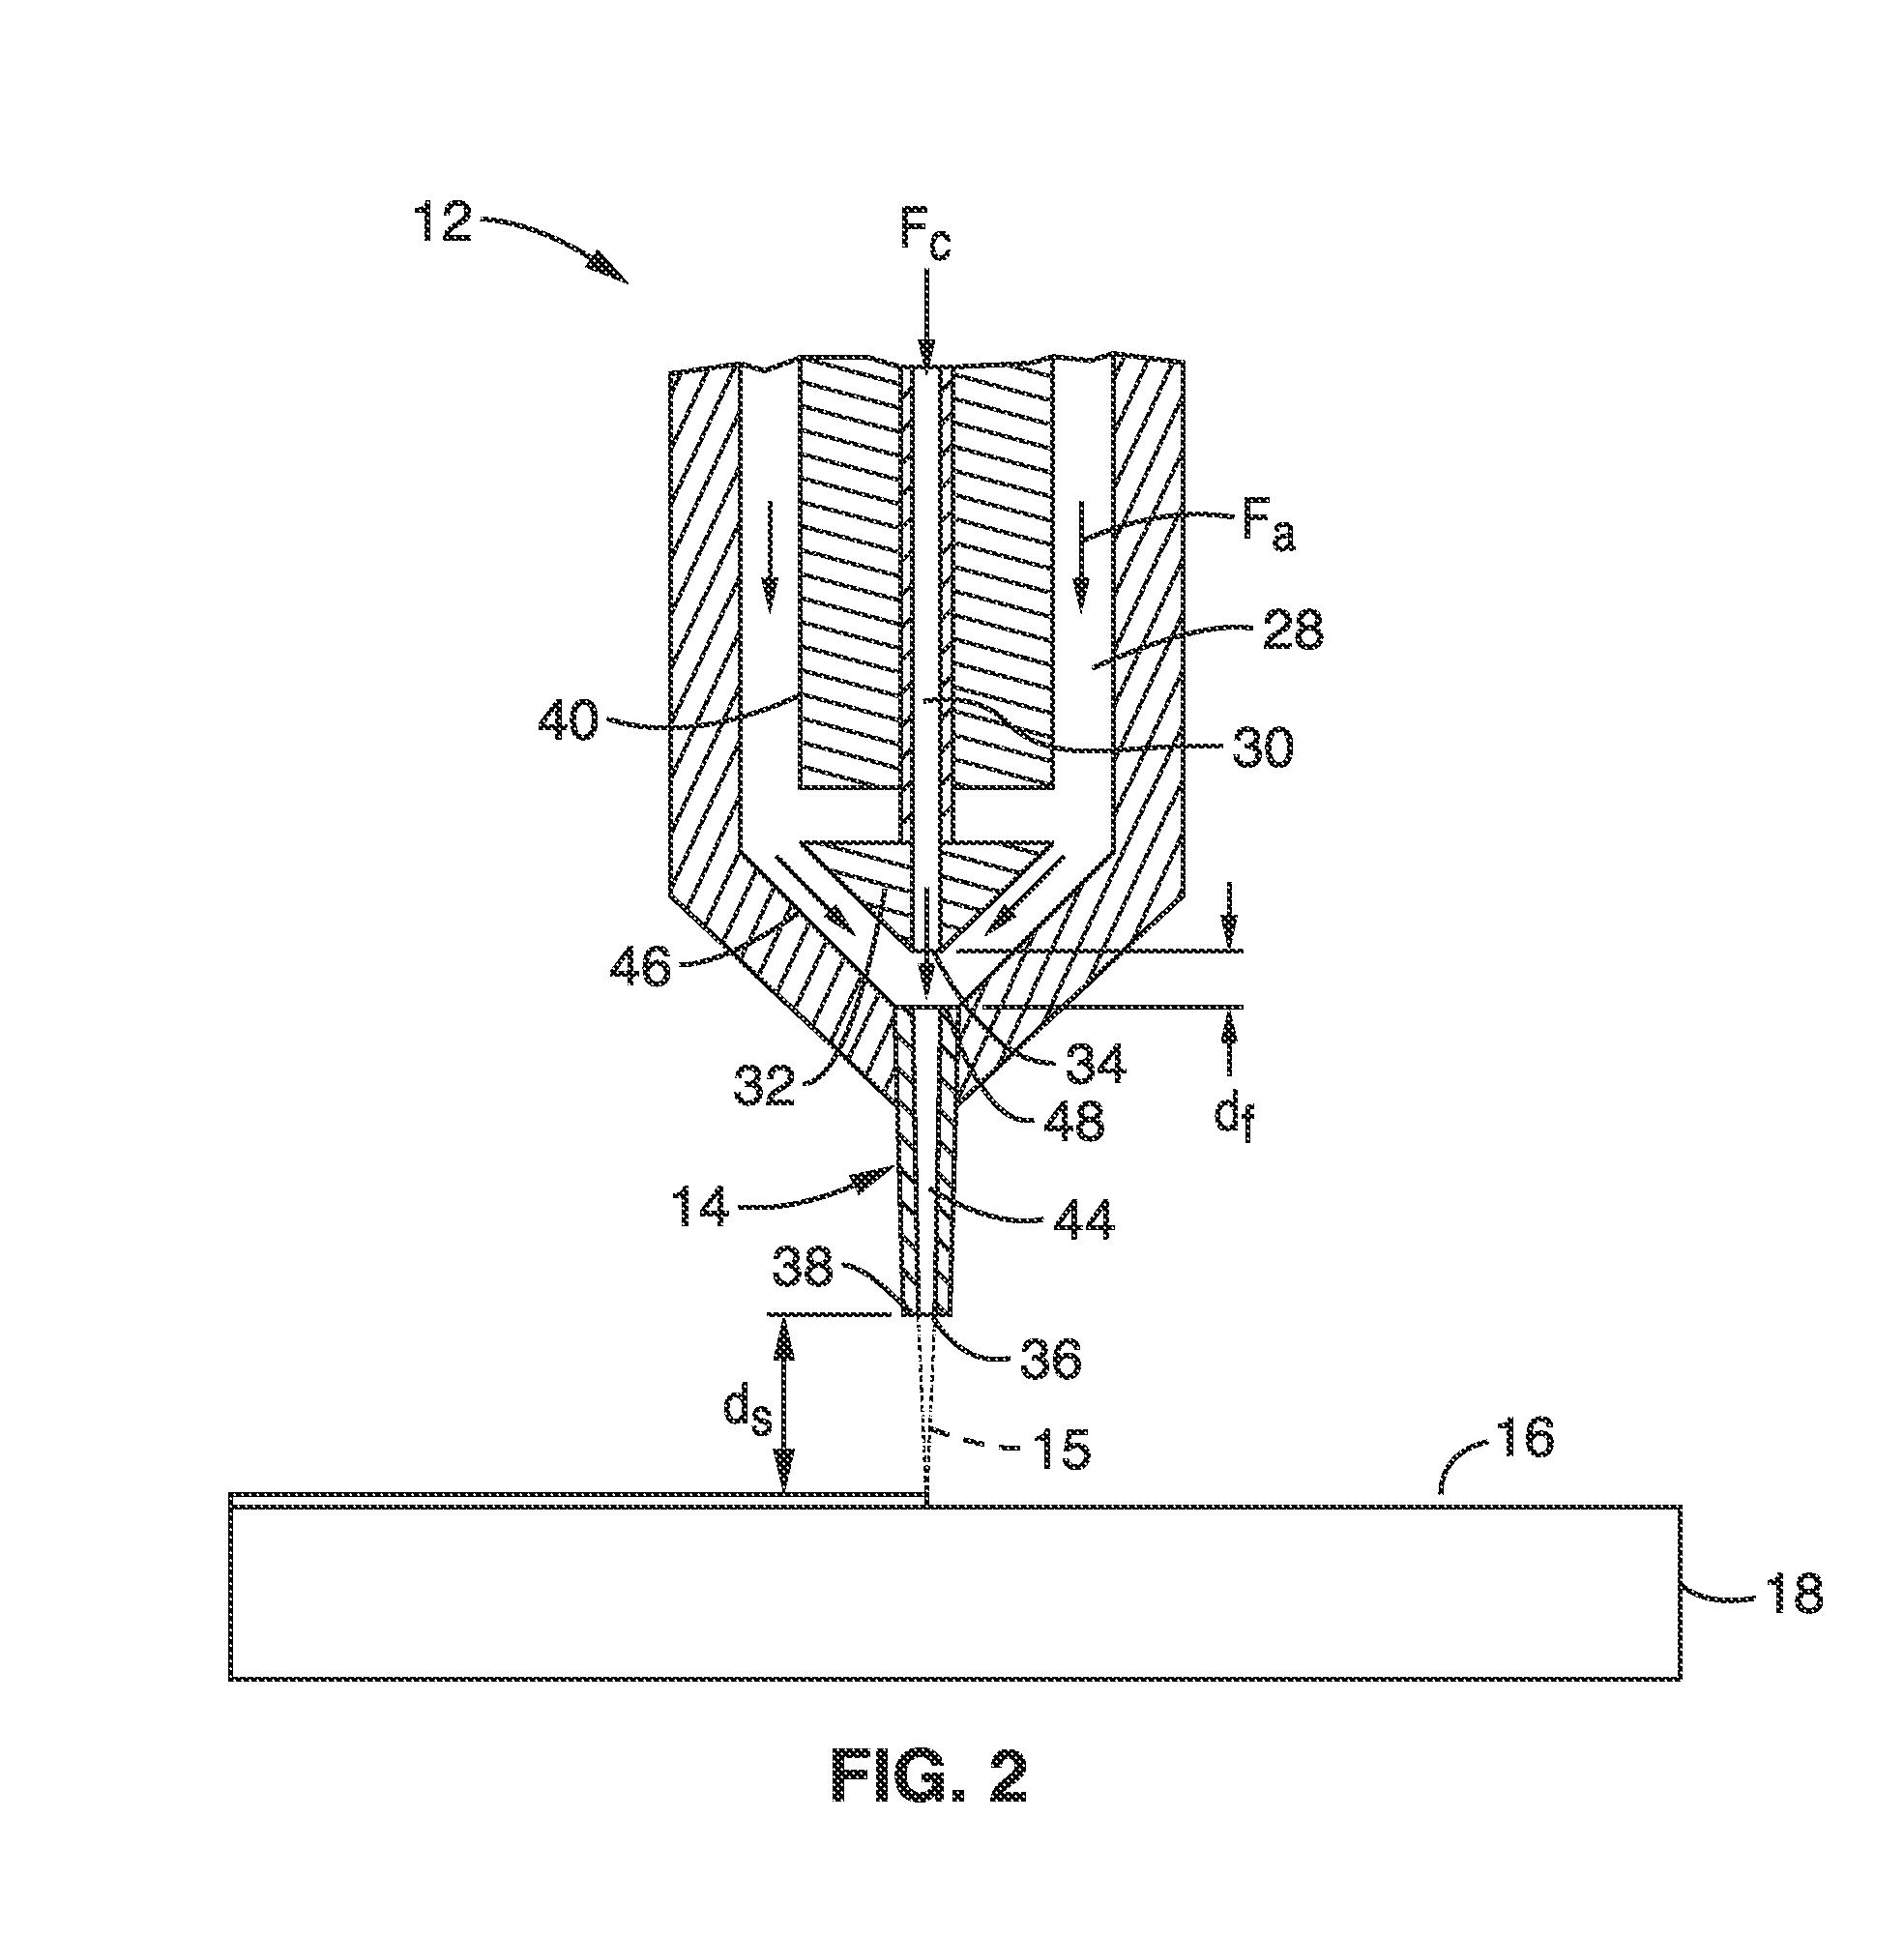 Micro cold spray direct write systems and methods for printed micro electronics